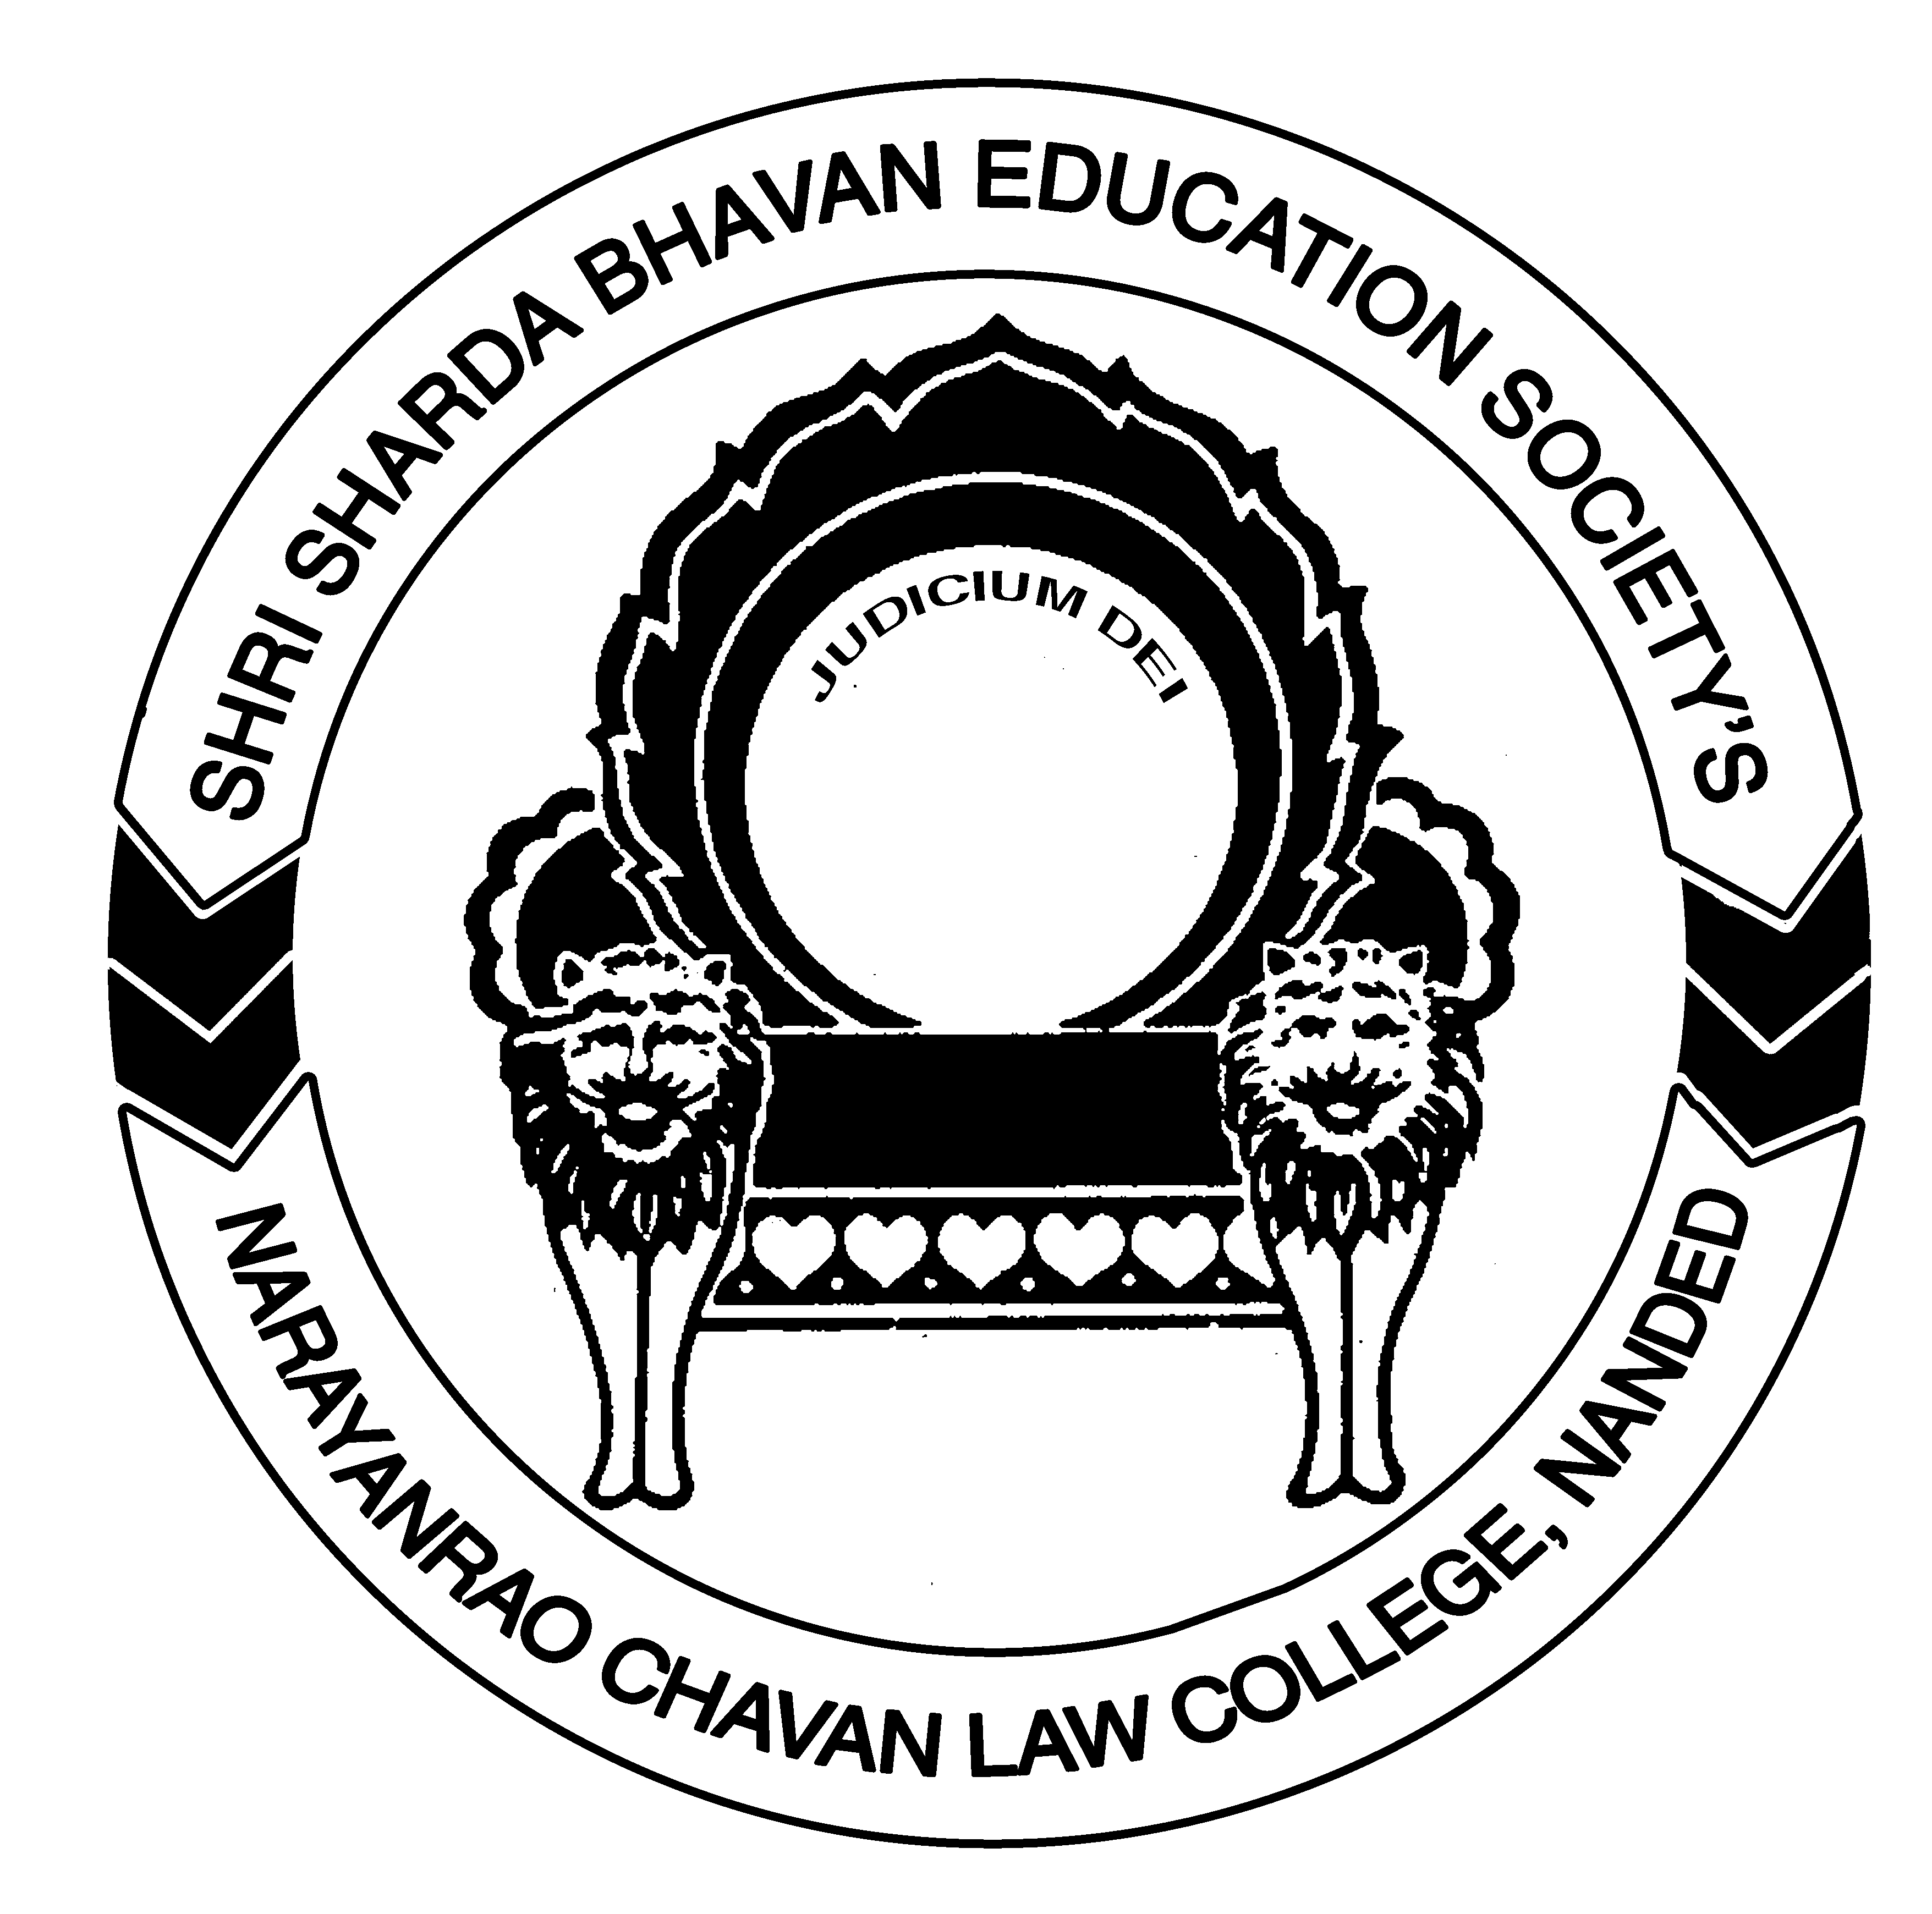 NARAYANRAO CHAVAN LAW COLLEGE NANDED